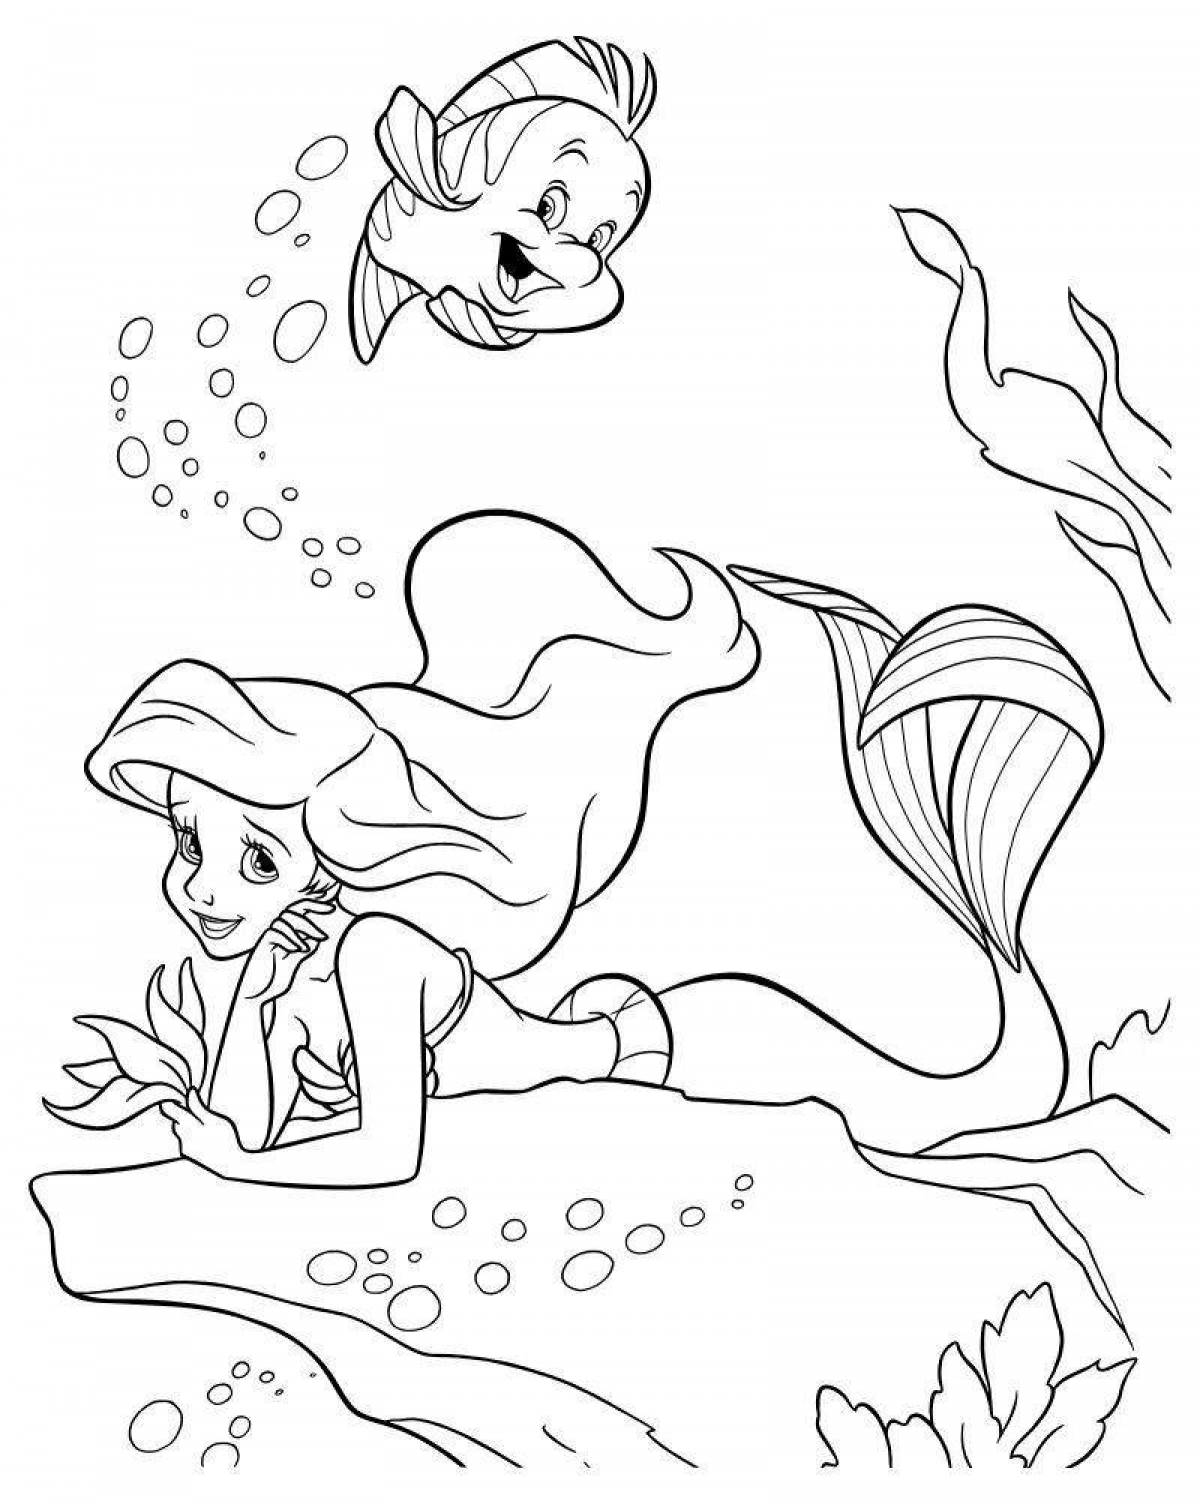 Playful mermaid coloring book for 4-5 year olds